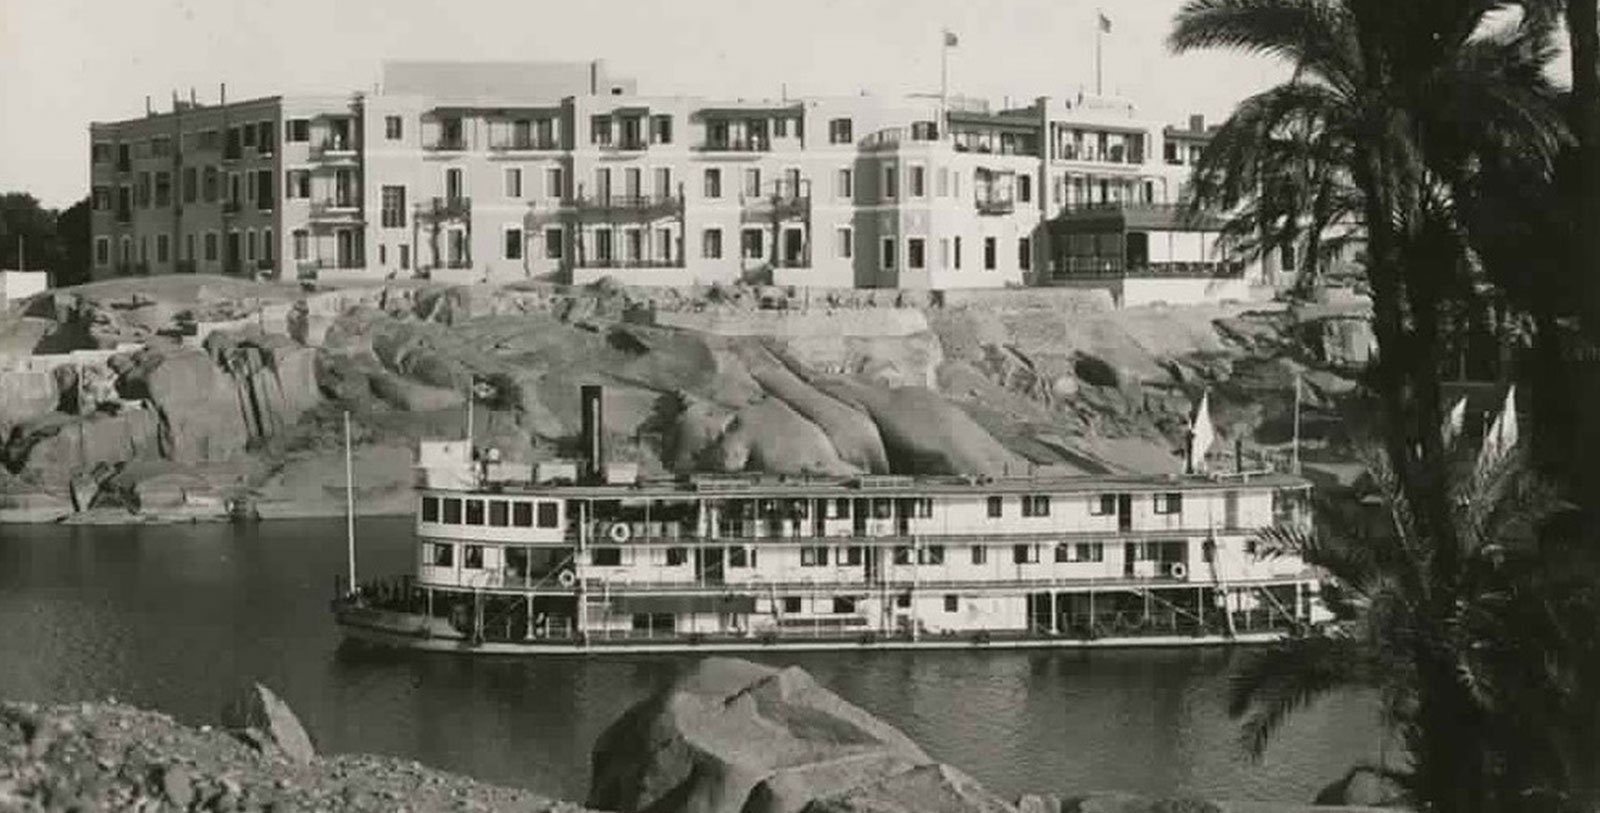 Historical Image of Exterior with Boat in Foreground, Sofitel Legend Old Cataract Aswan, 1899, Member of Historic Hotels Worldwide, in Aswan, Egypt